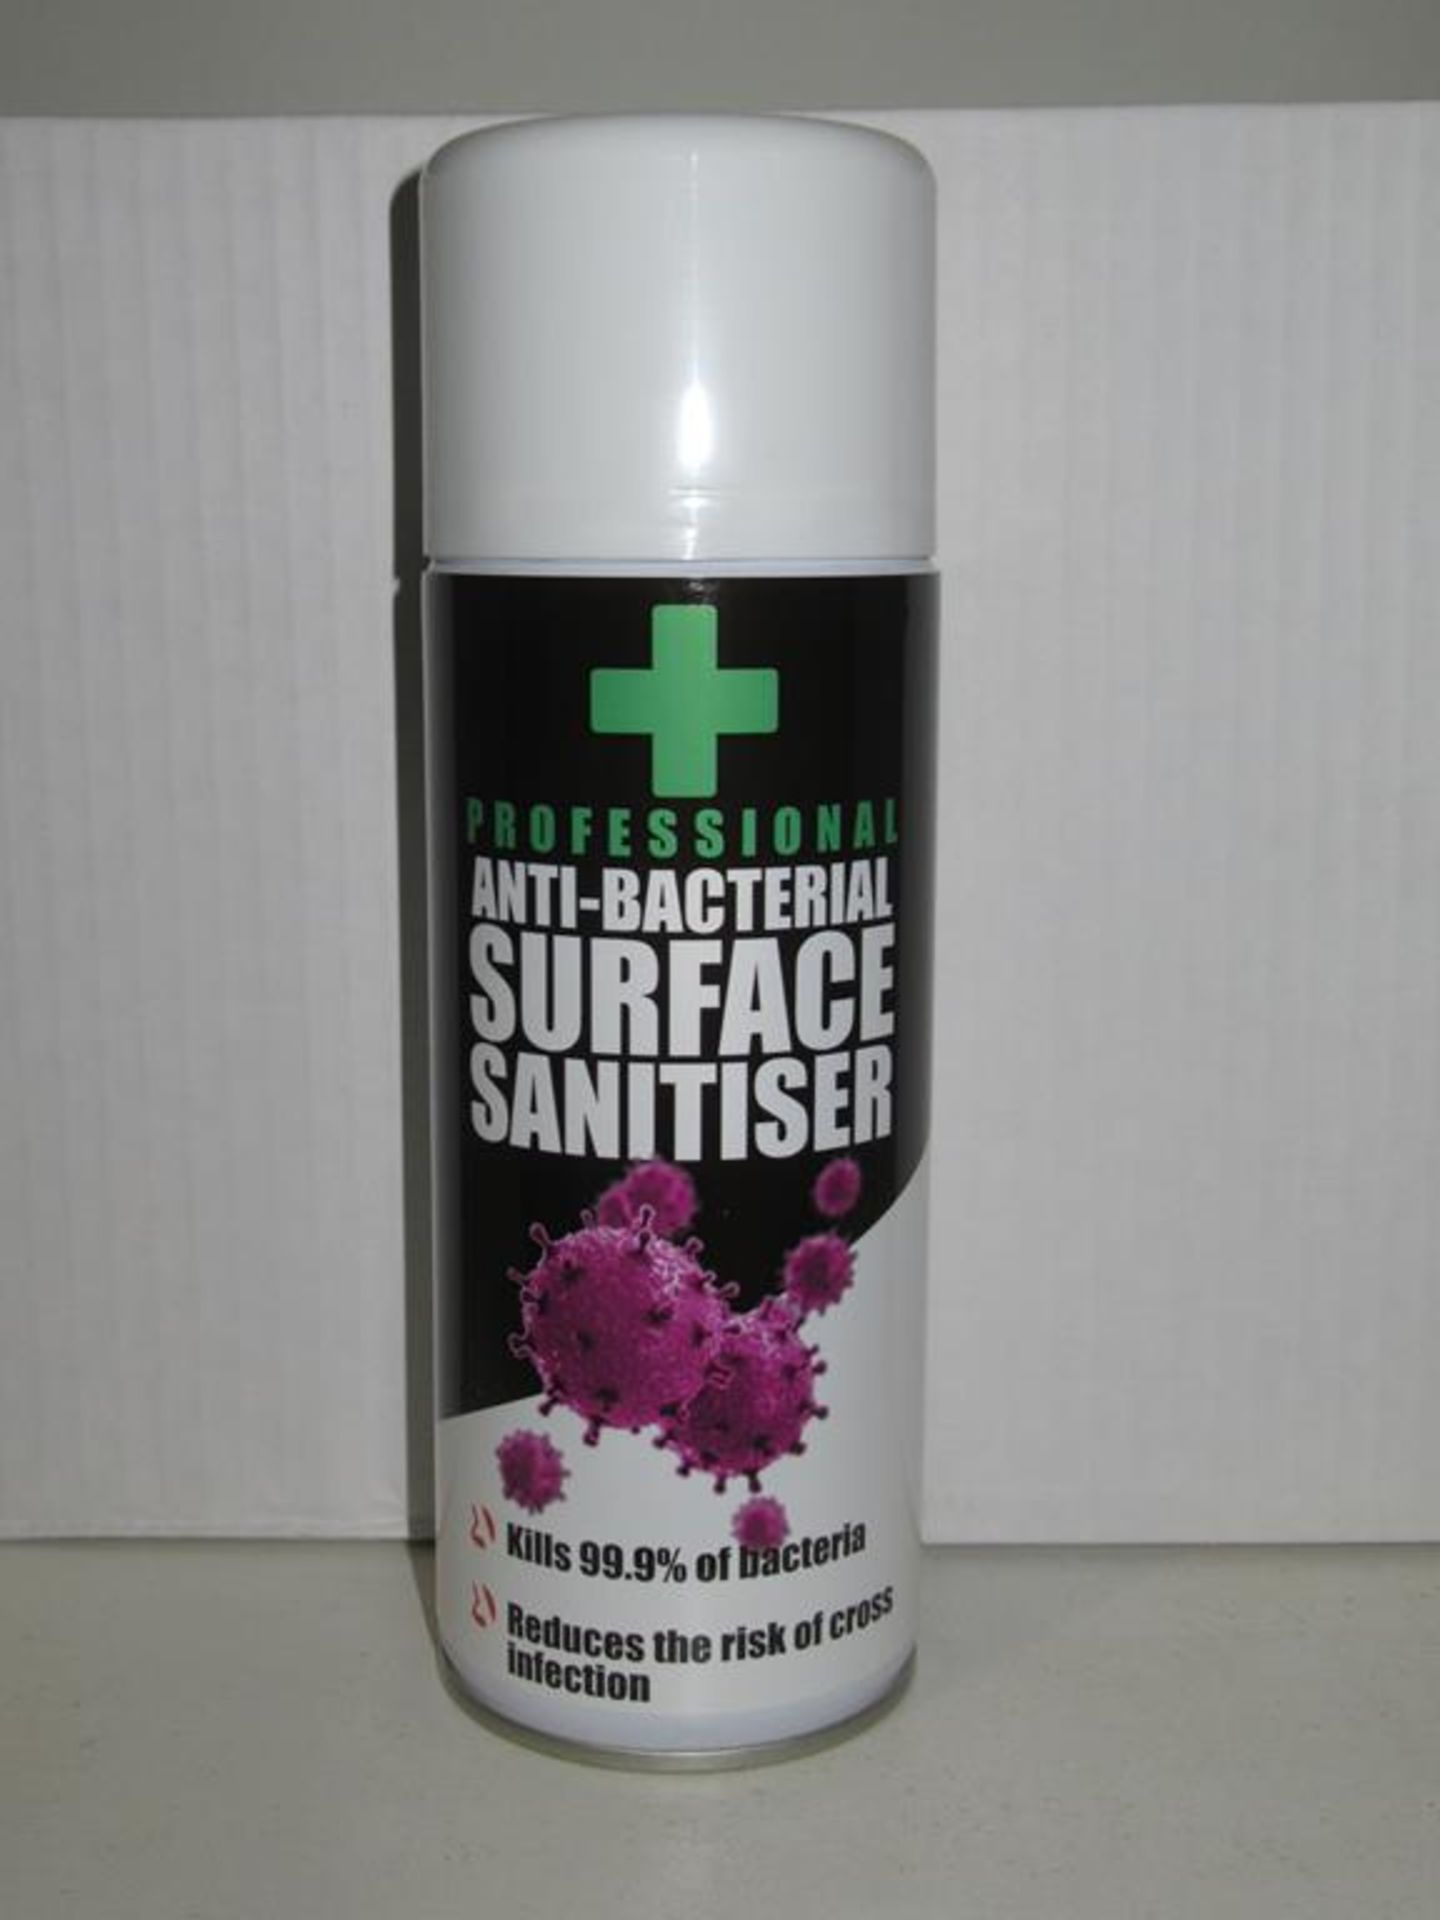 Approx 432x (36x boxes- 12x 500ml per box) AzPro Professional anti-bacterial surface sanitiser - Image 2 of 4